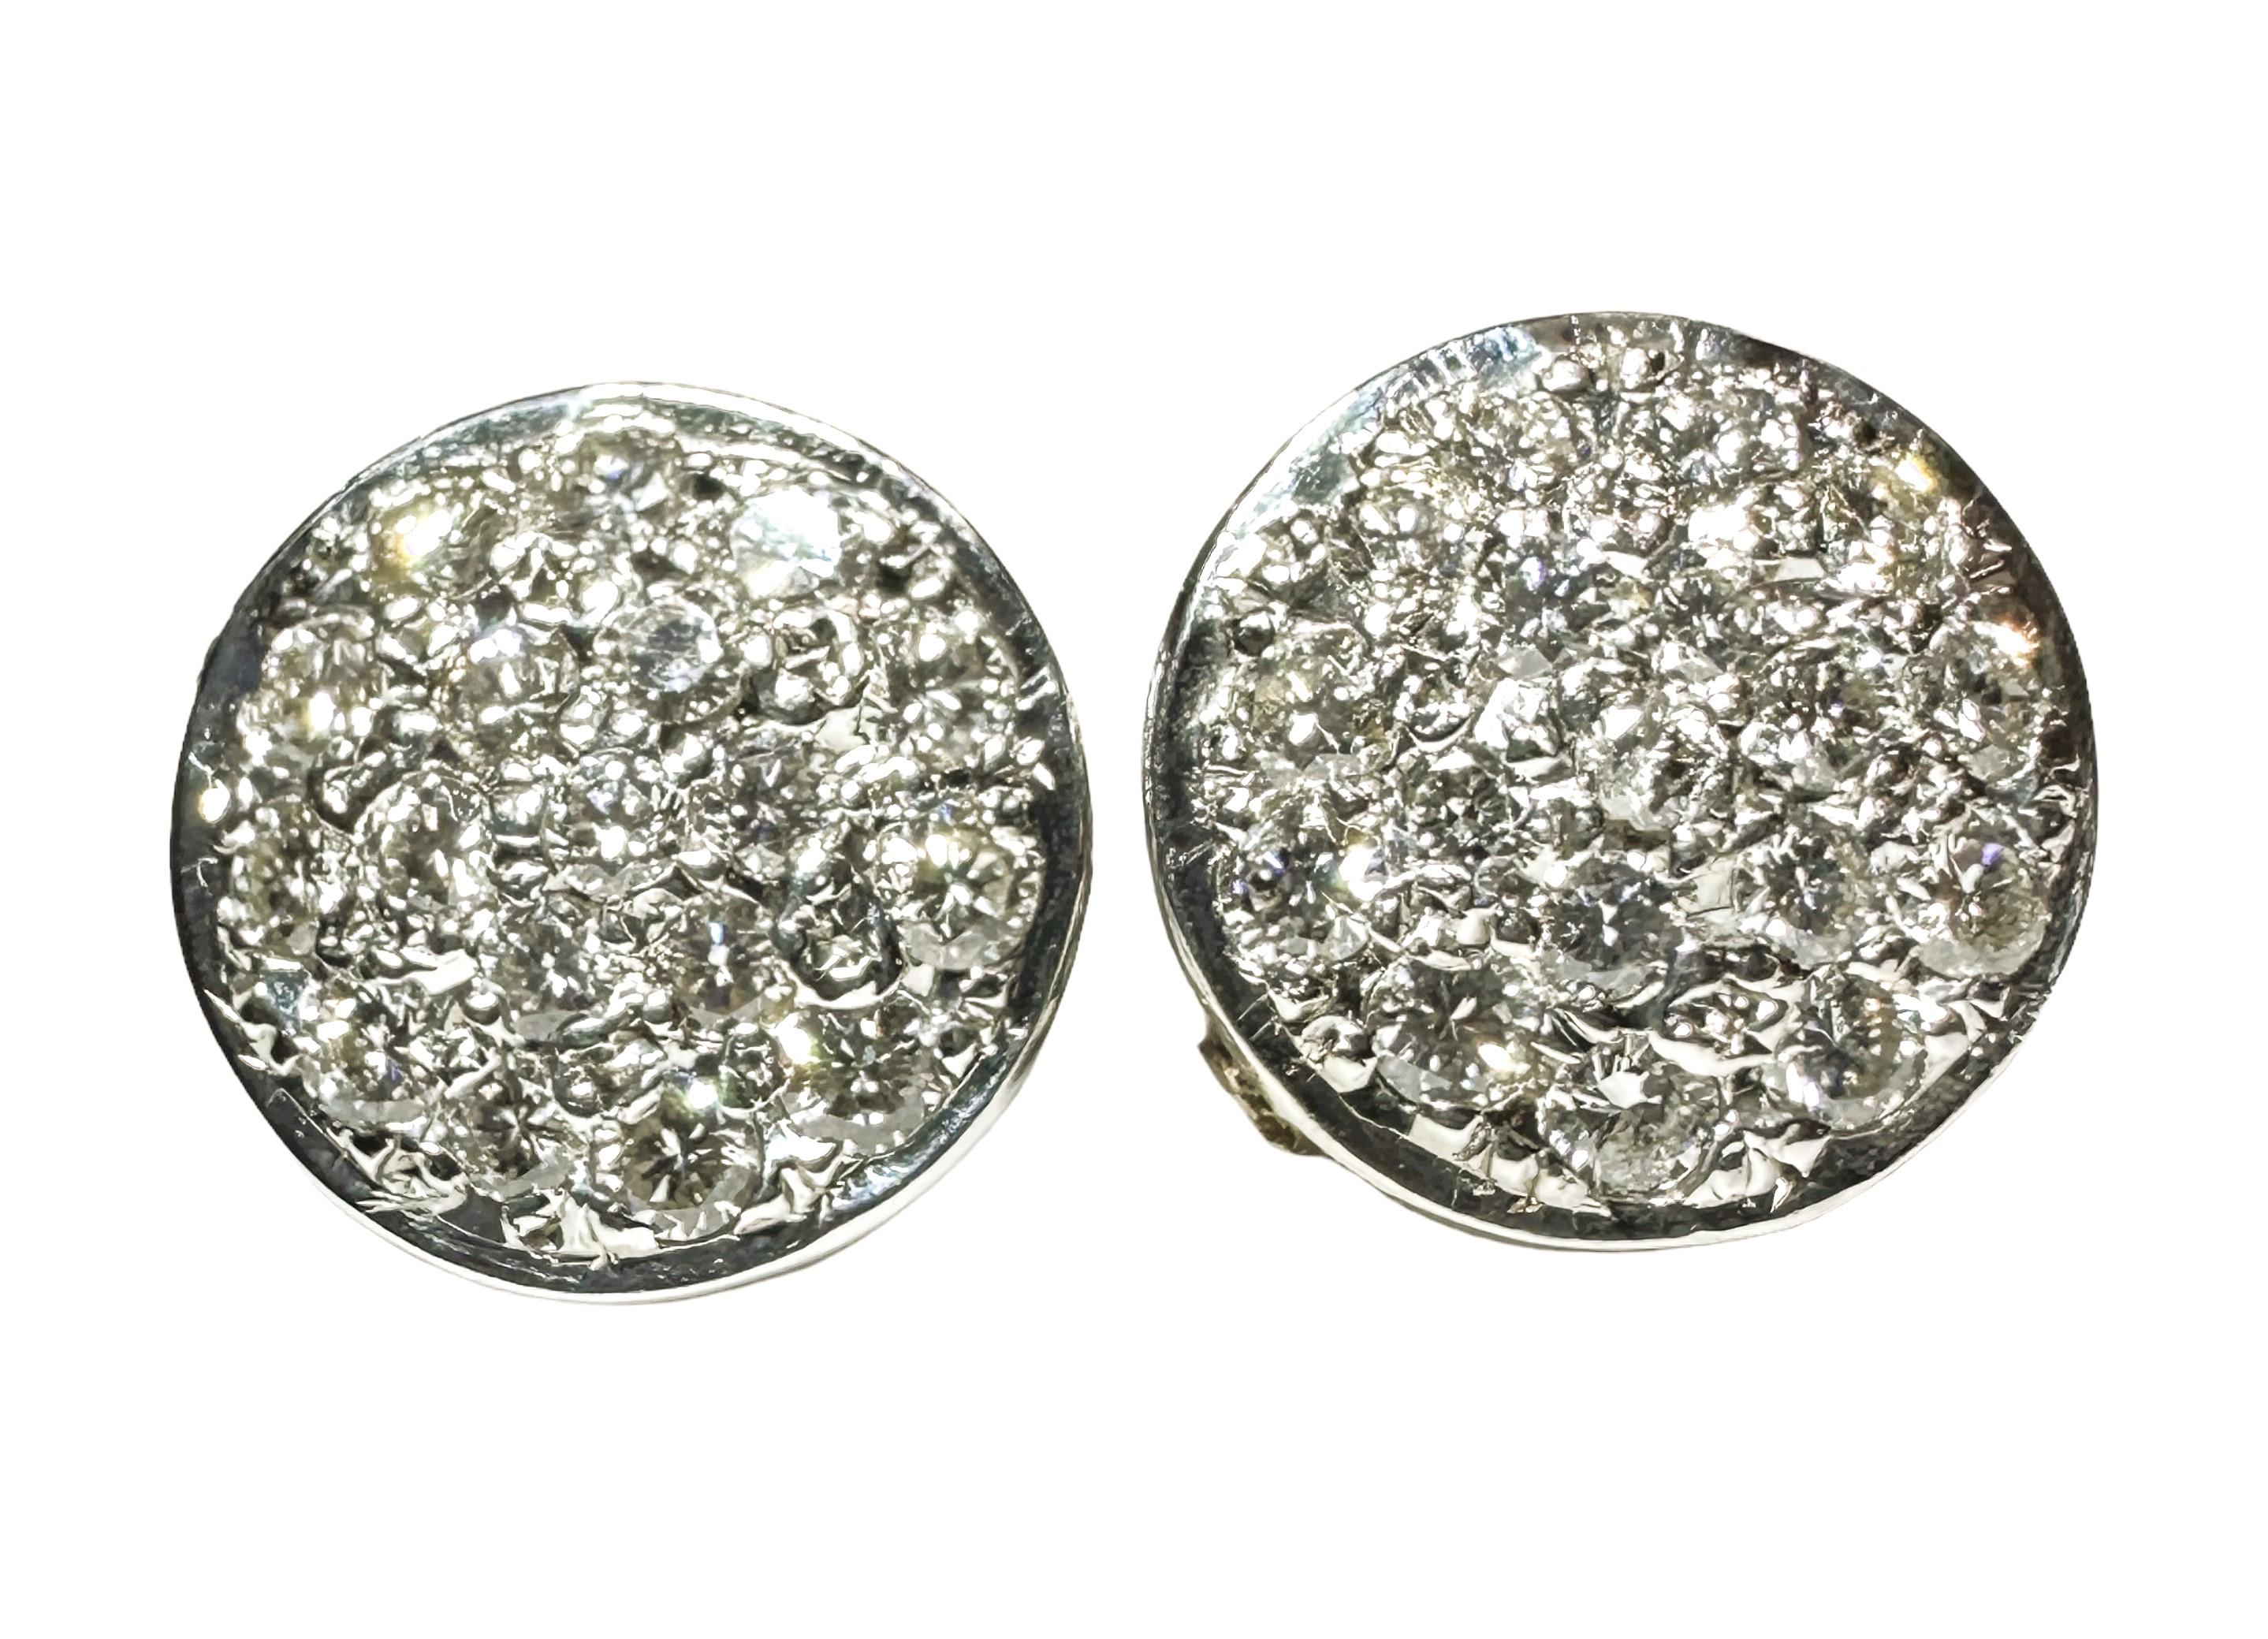 Brilliant Cut 18K White Gold 1.5 ct Pave Diamond Stud Earrings with Appraisal  VS2 For Sale